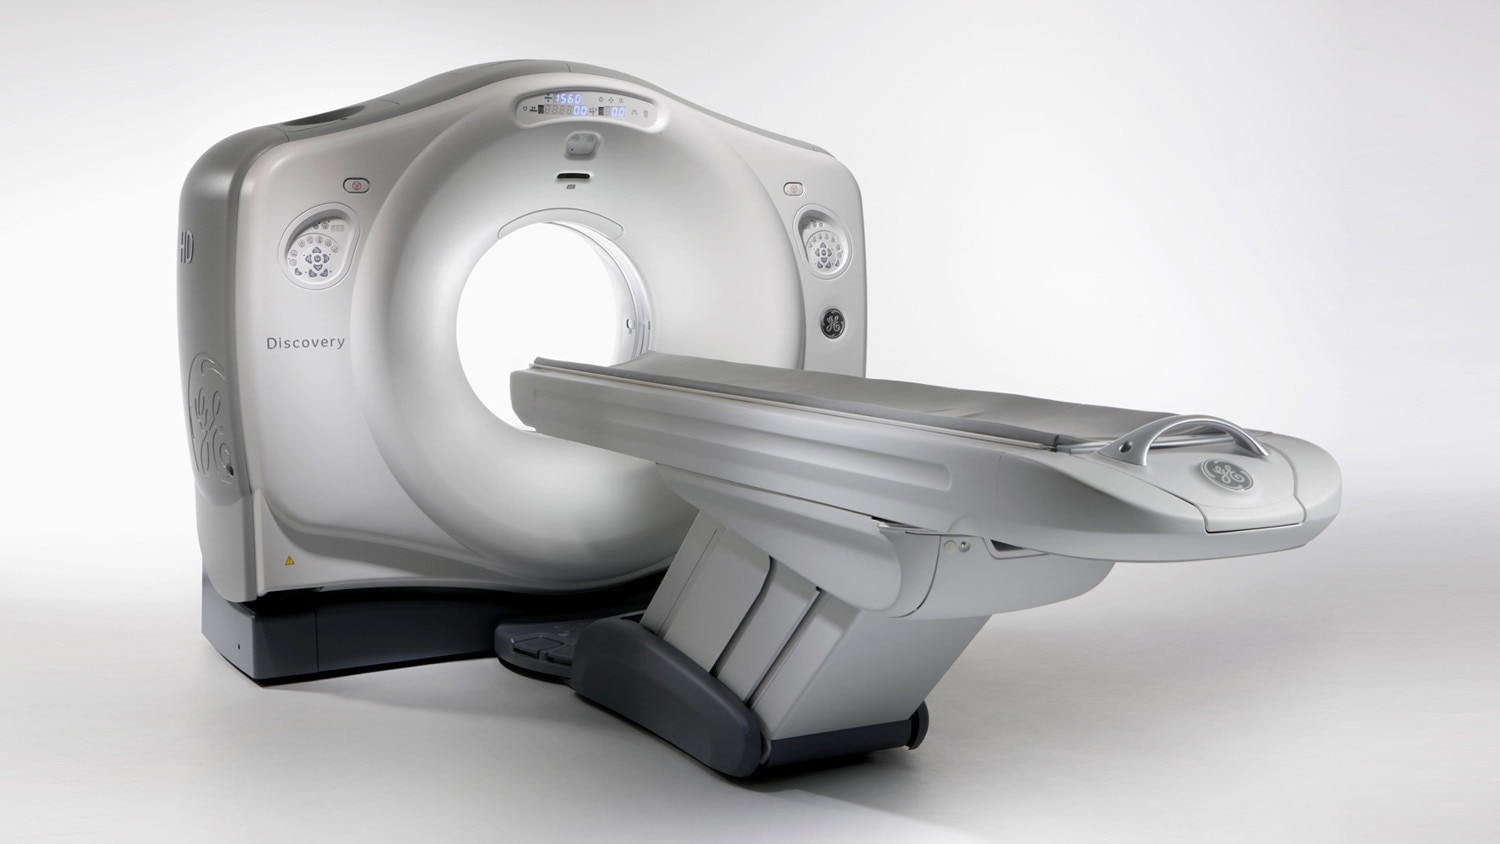 duct-product-categories-computed-tomography-discovery-ct750-hd-discoveryhd_front_left2_jpg